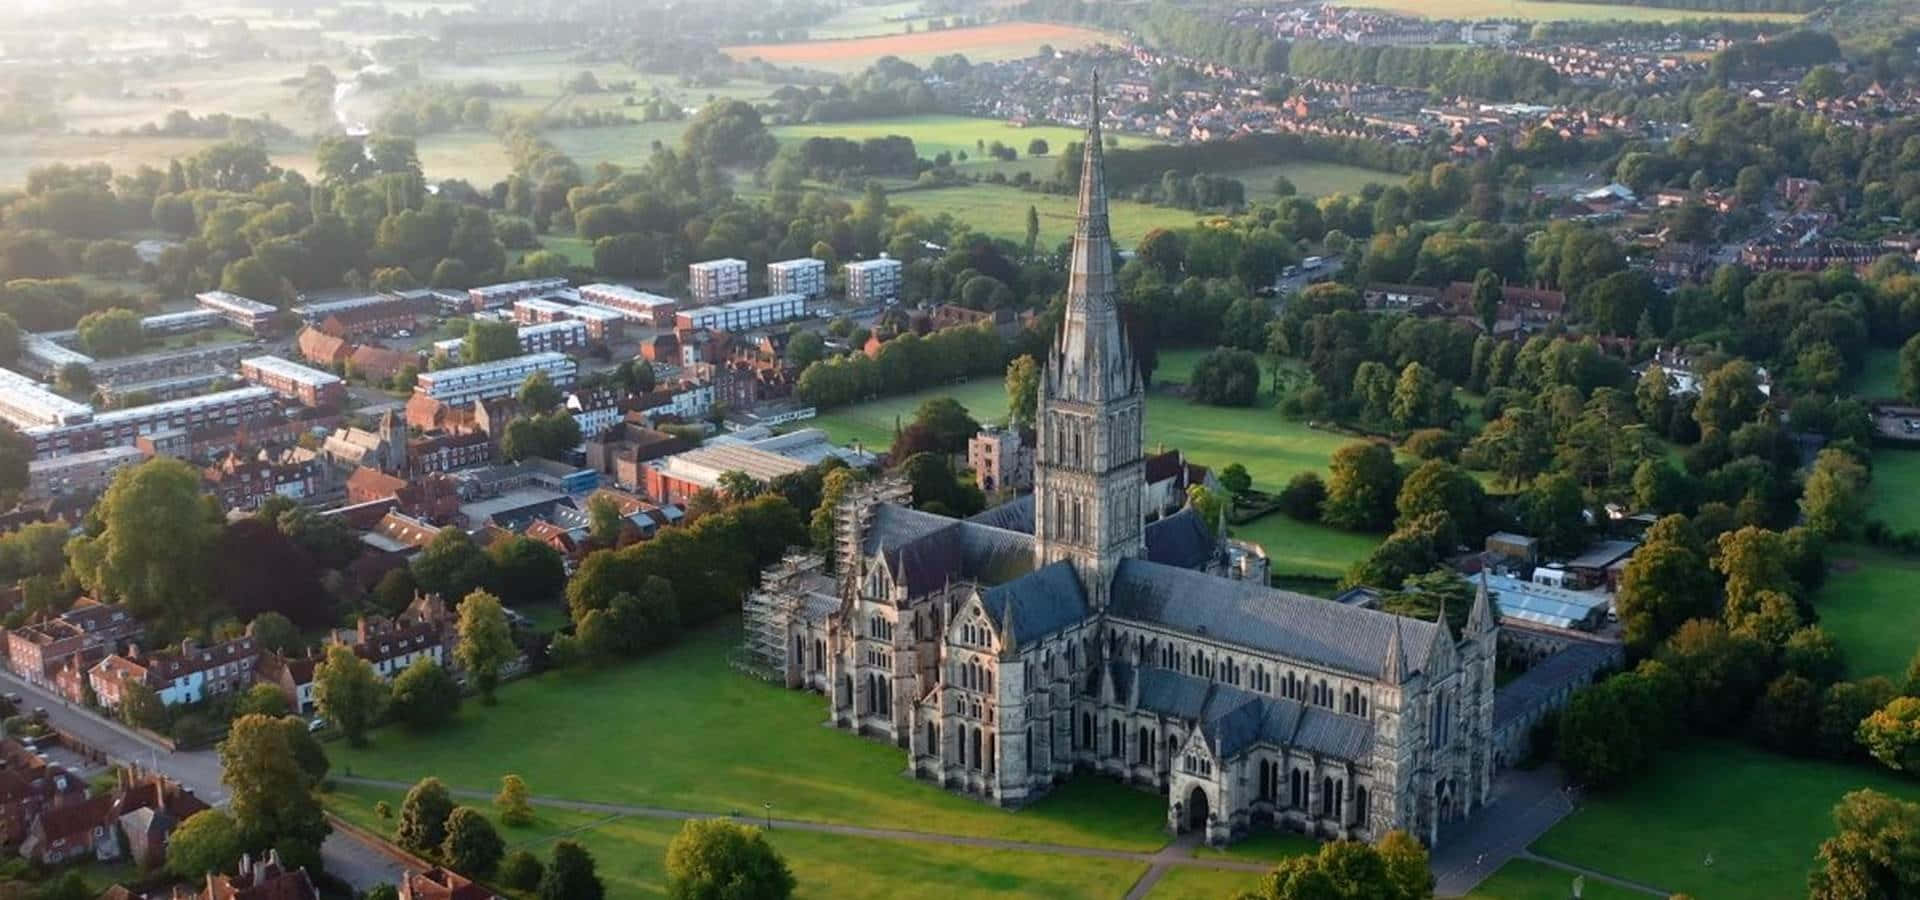 Salisbury Cathedral Aerial View Wallpaper